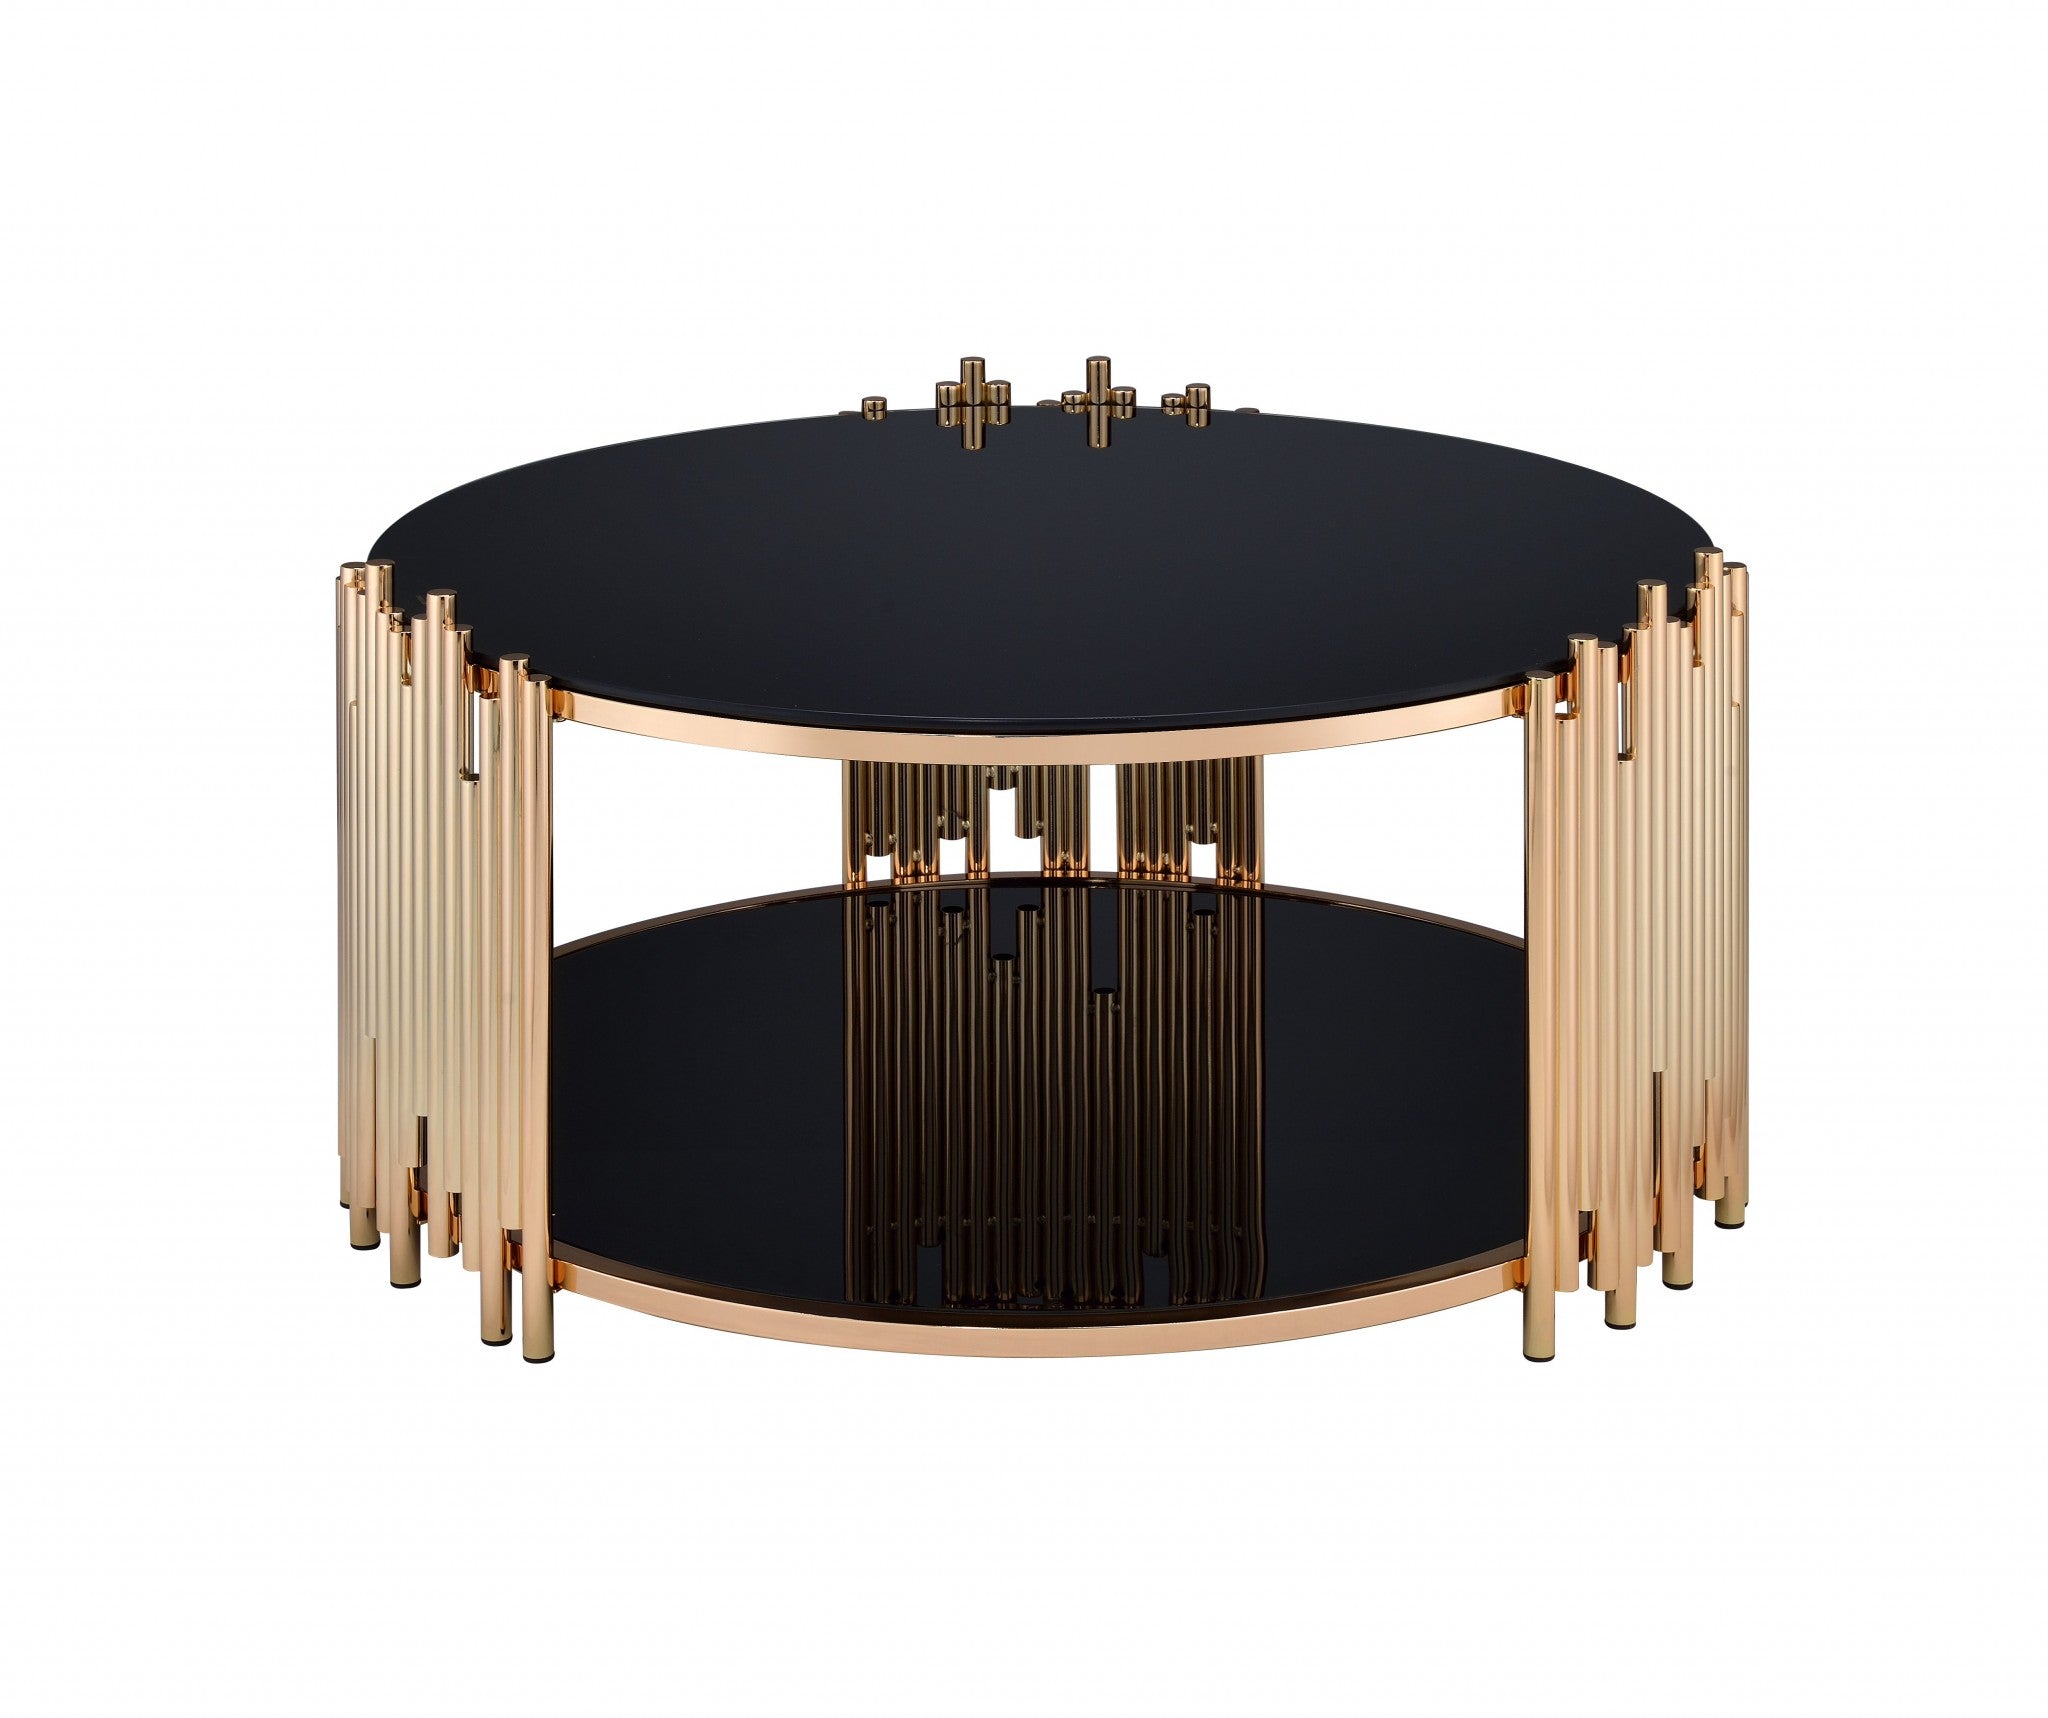 37" X 37" X 18" Black Glass And Gold Coffee Table